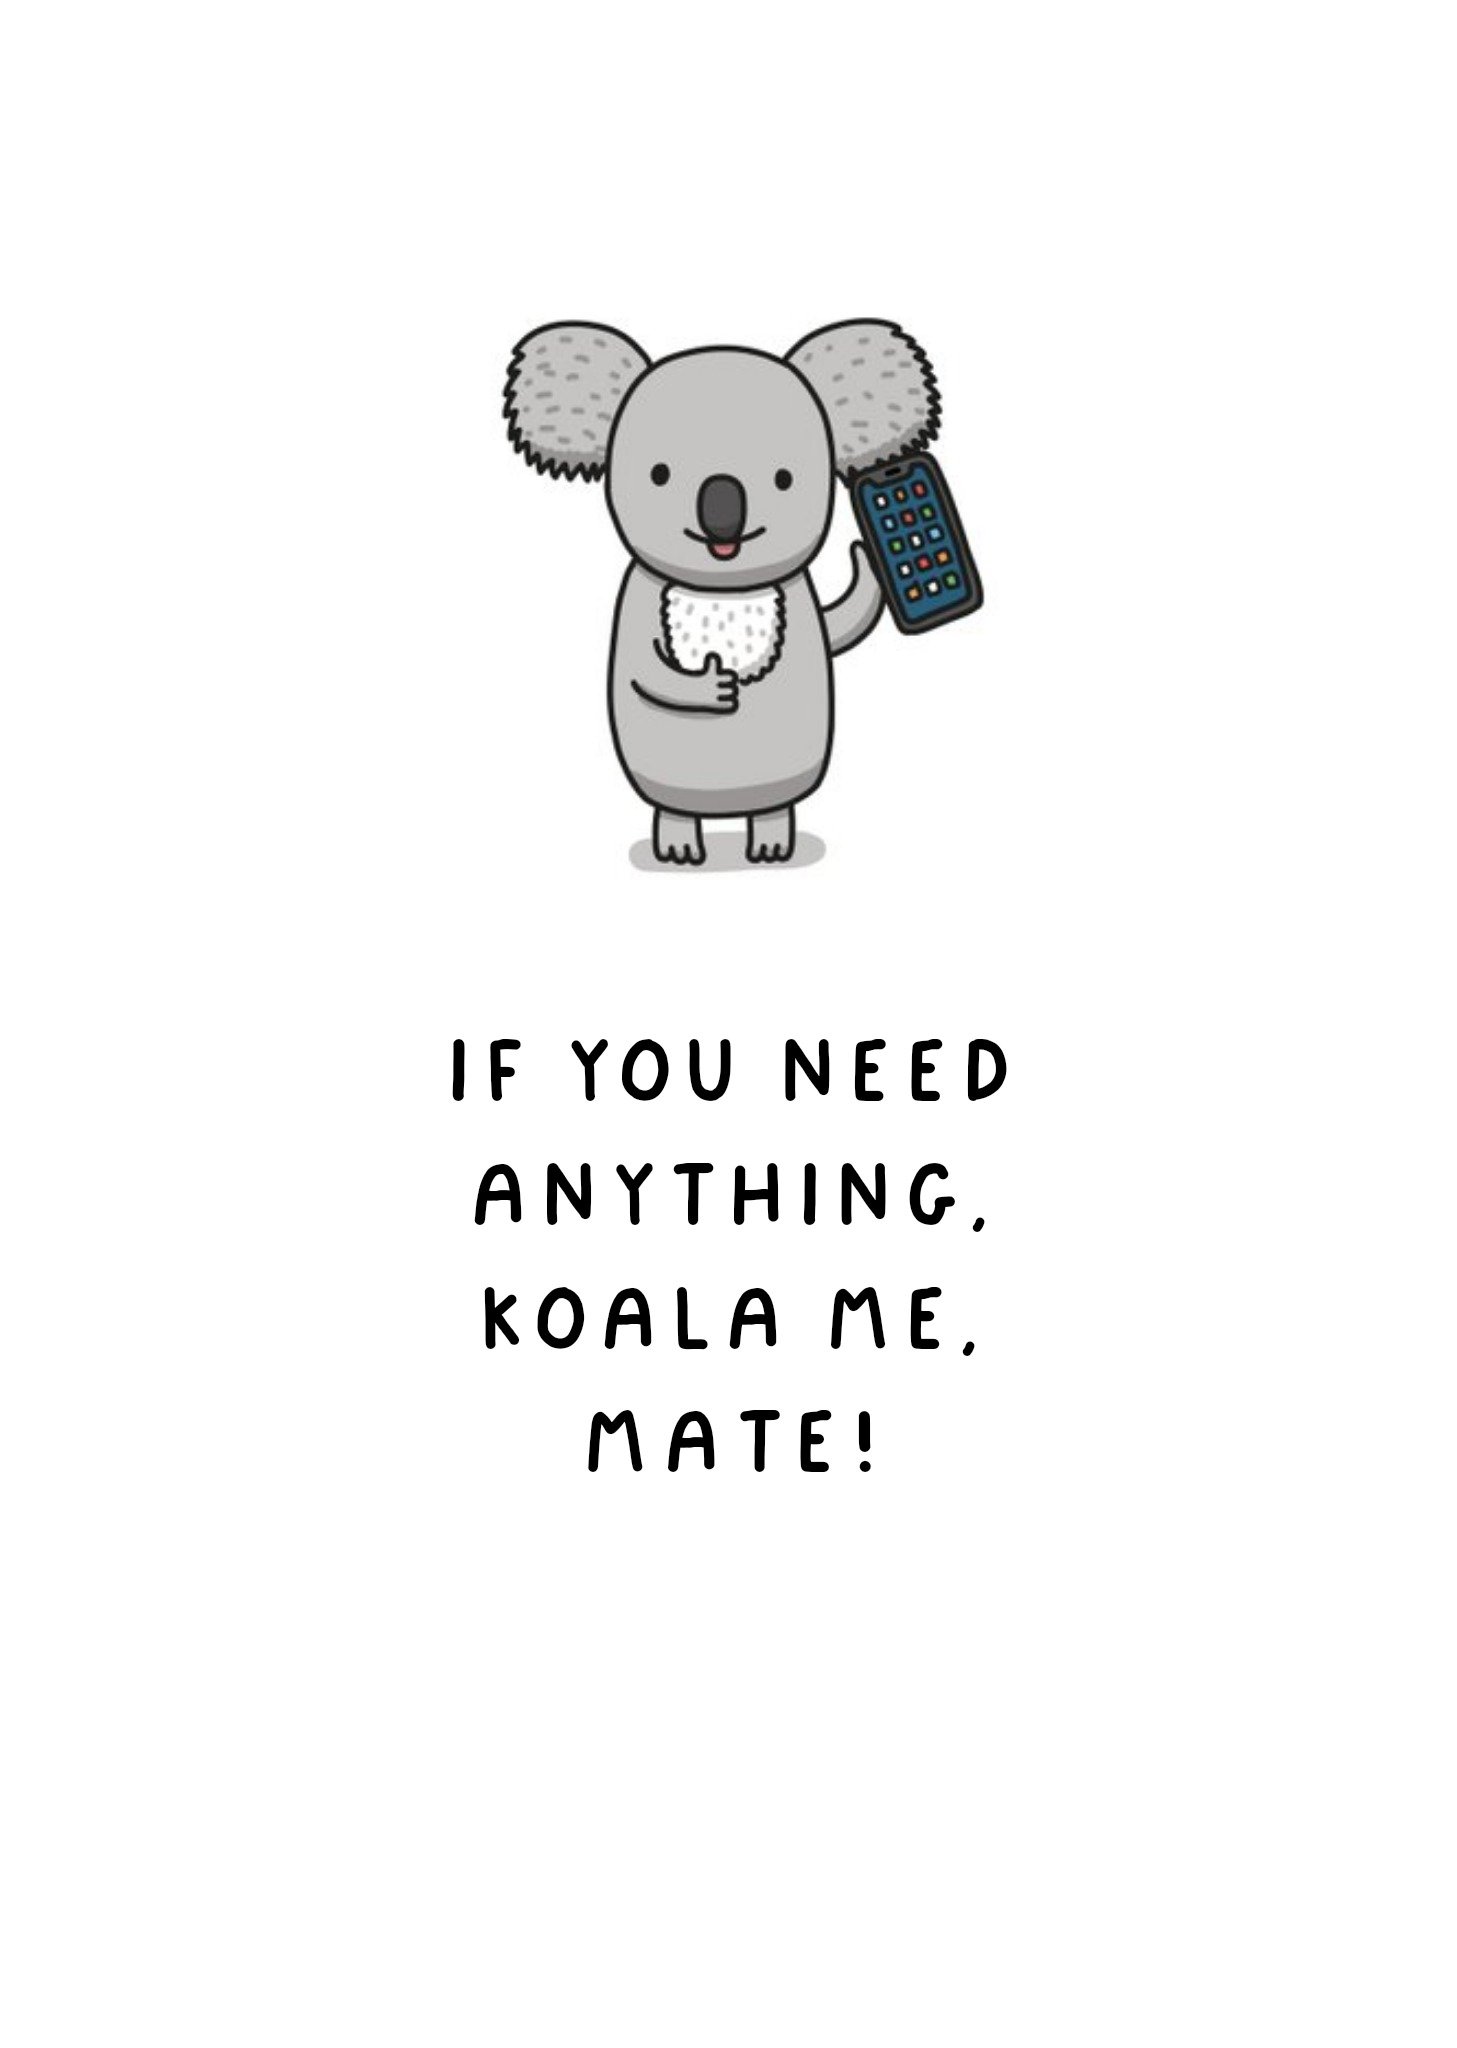 Moonpig Illustration Of A Koala With A Phone Funny Pun Thinking Of You Card Ecard